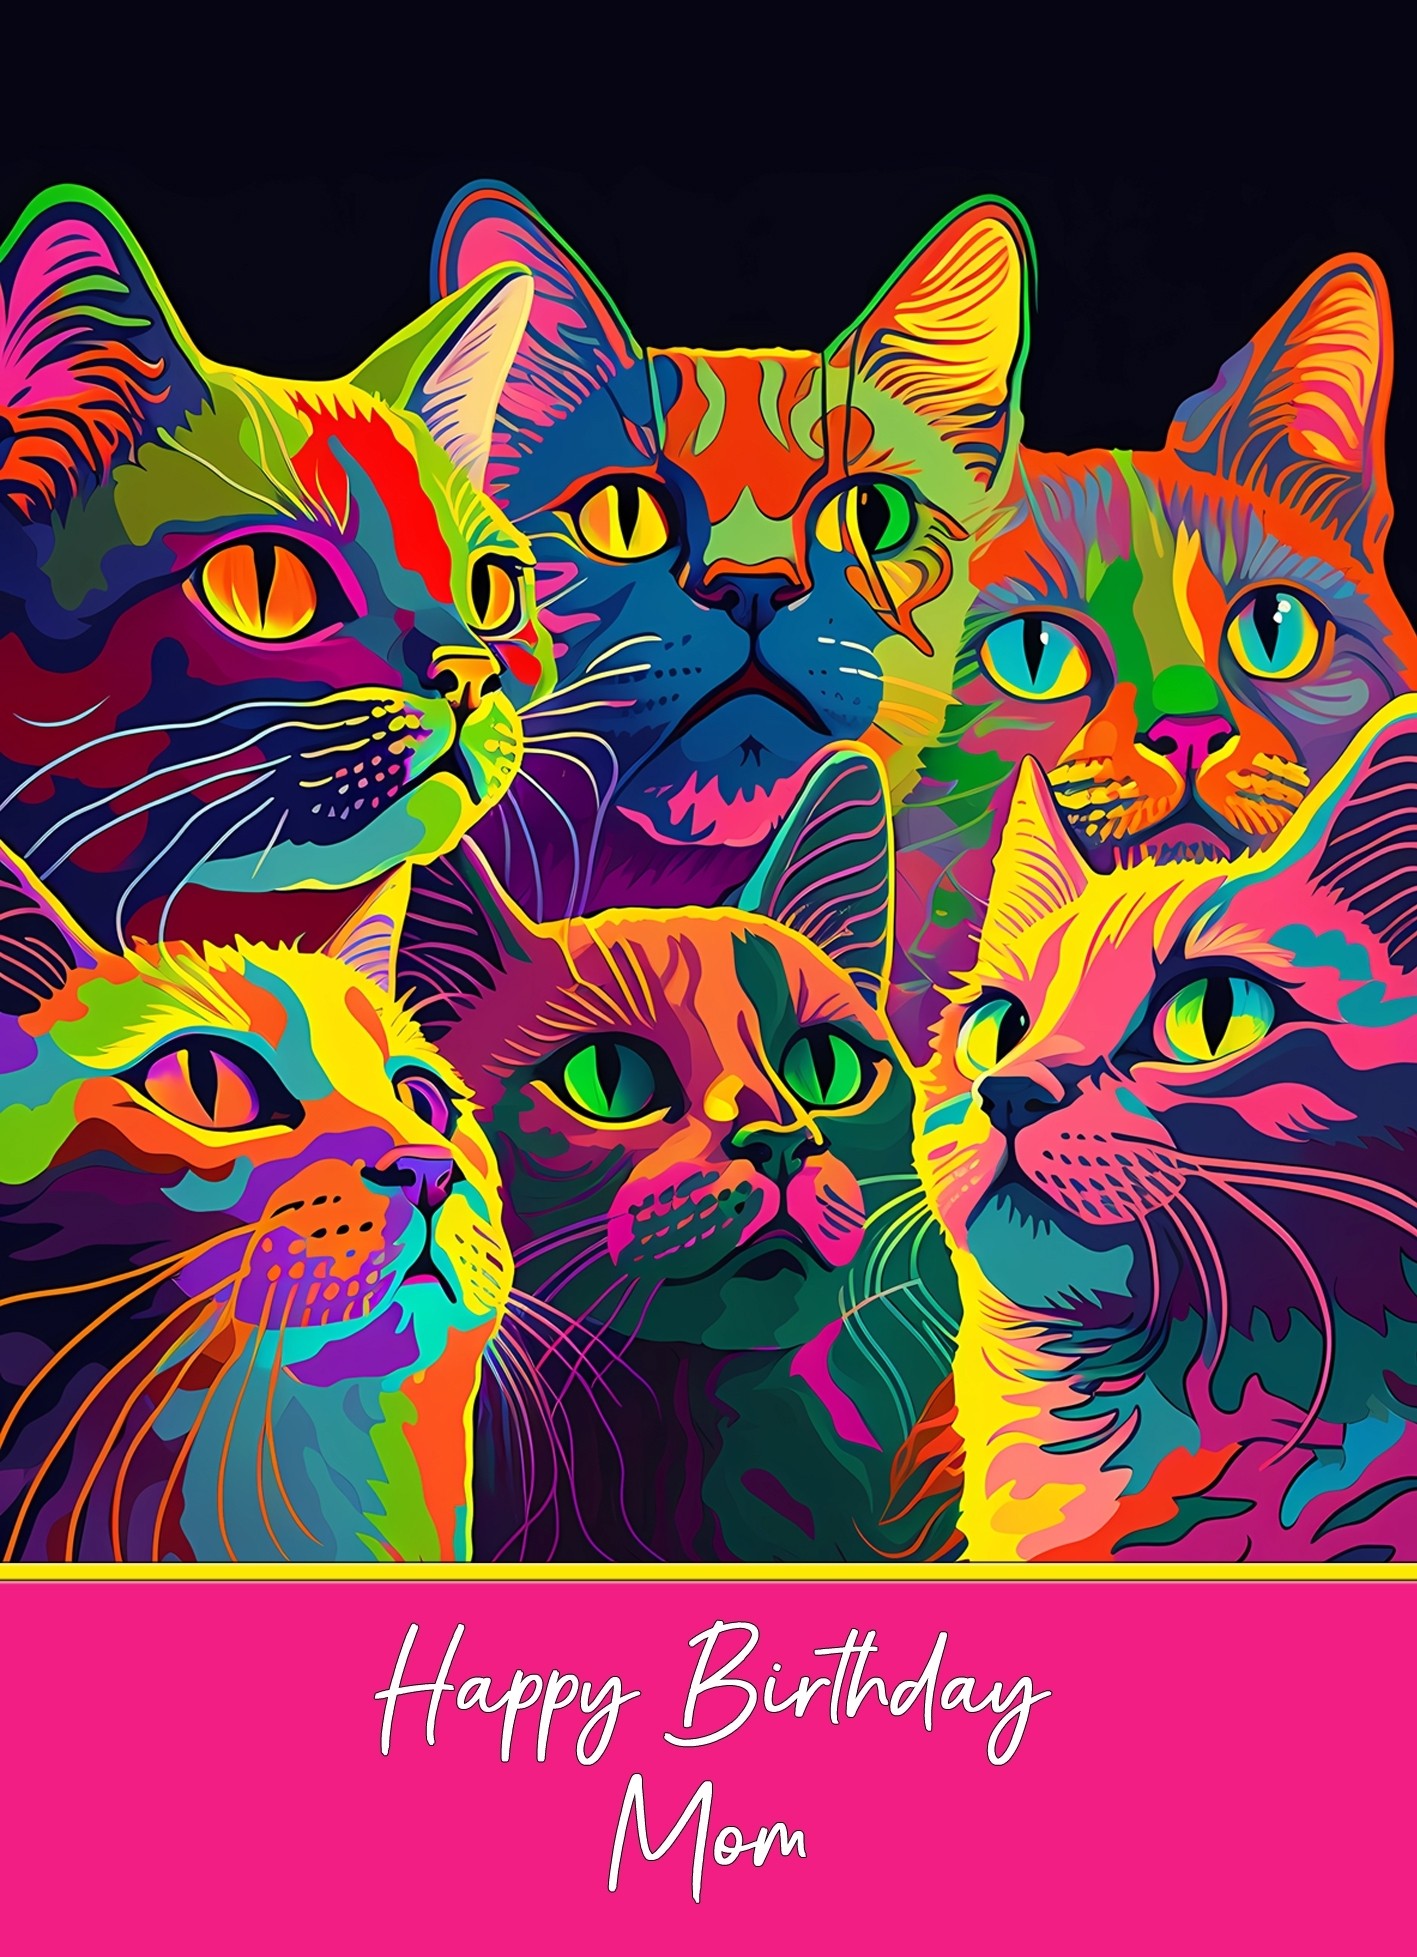 Birthday Card For Mom (Colourful Cat Art)